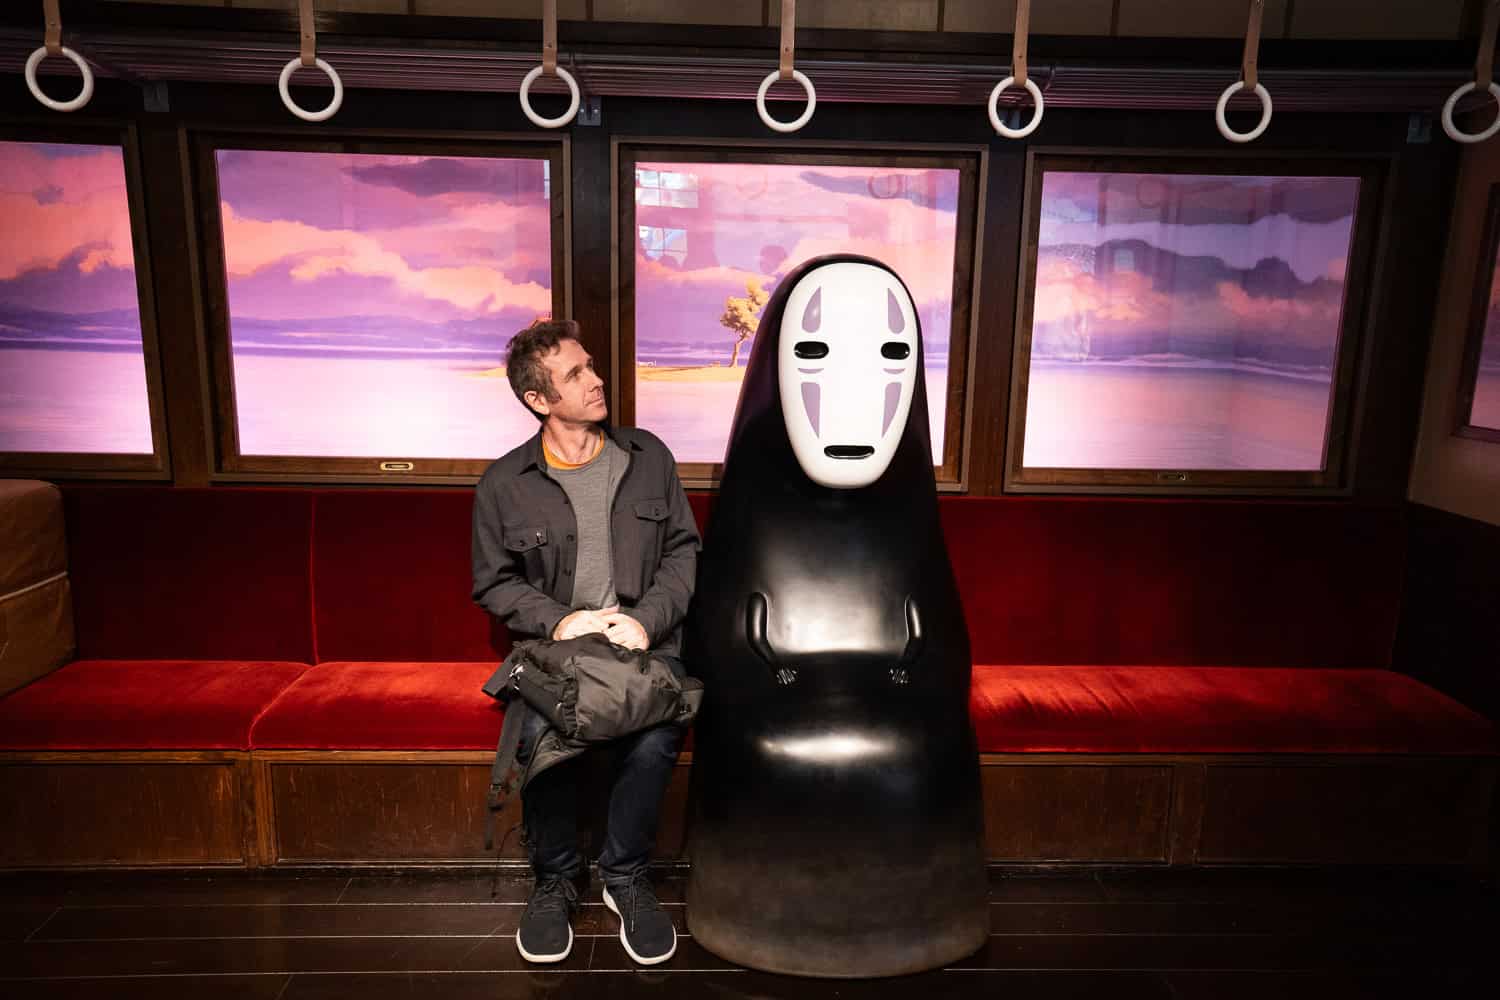 Simon sitting next to No Face from Spirited Away, Ghibli Park, Japan